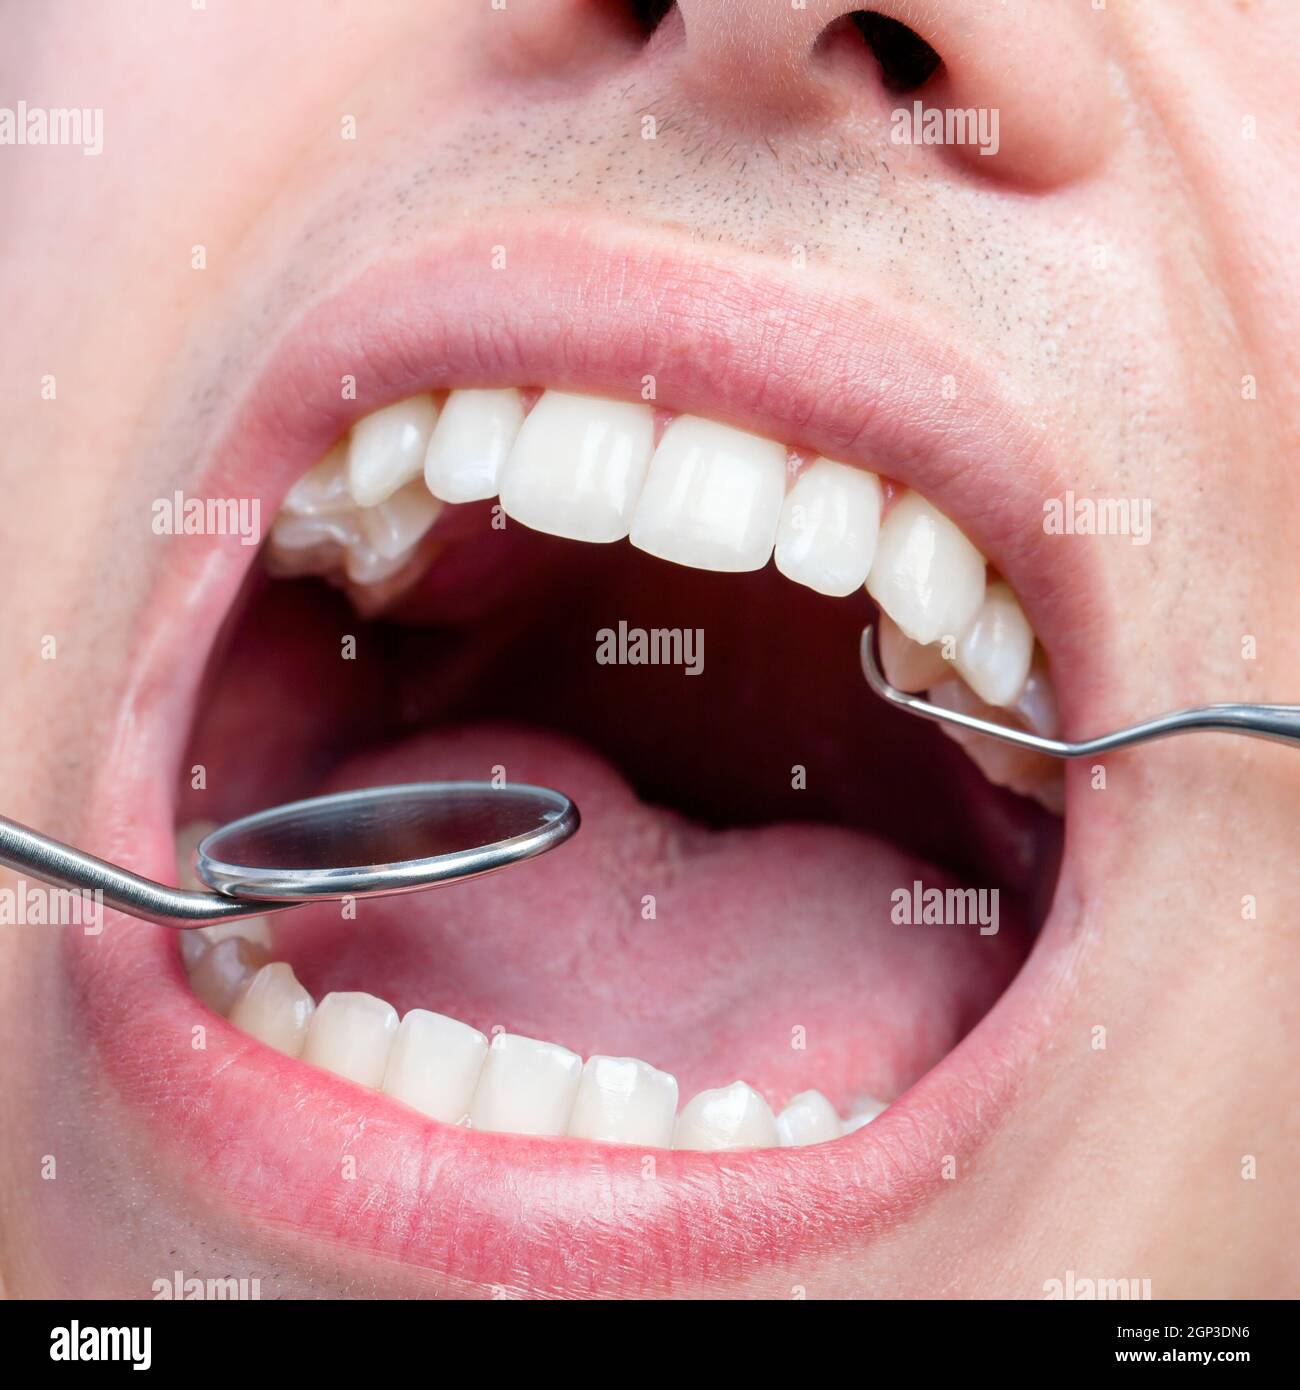 Extreme close up of Human male mouth showing teeth with dental hatchet and mouth mirror. Stock Photo